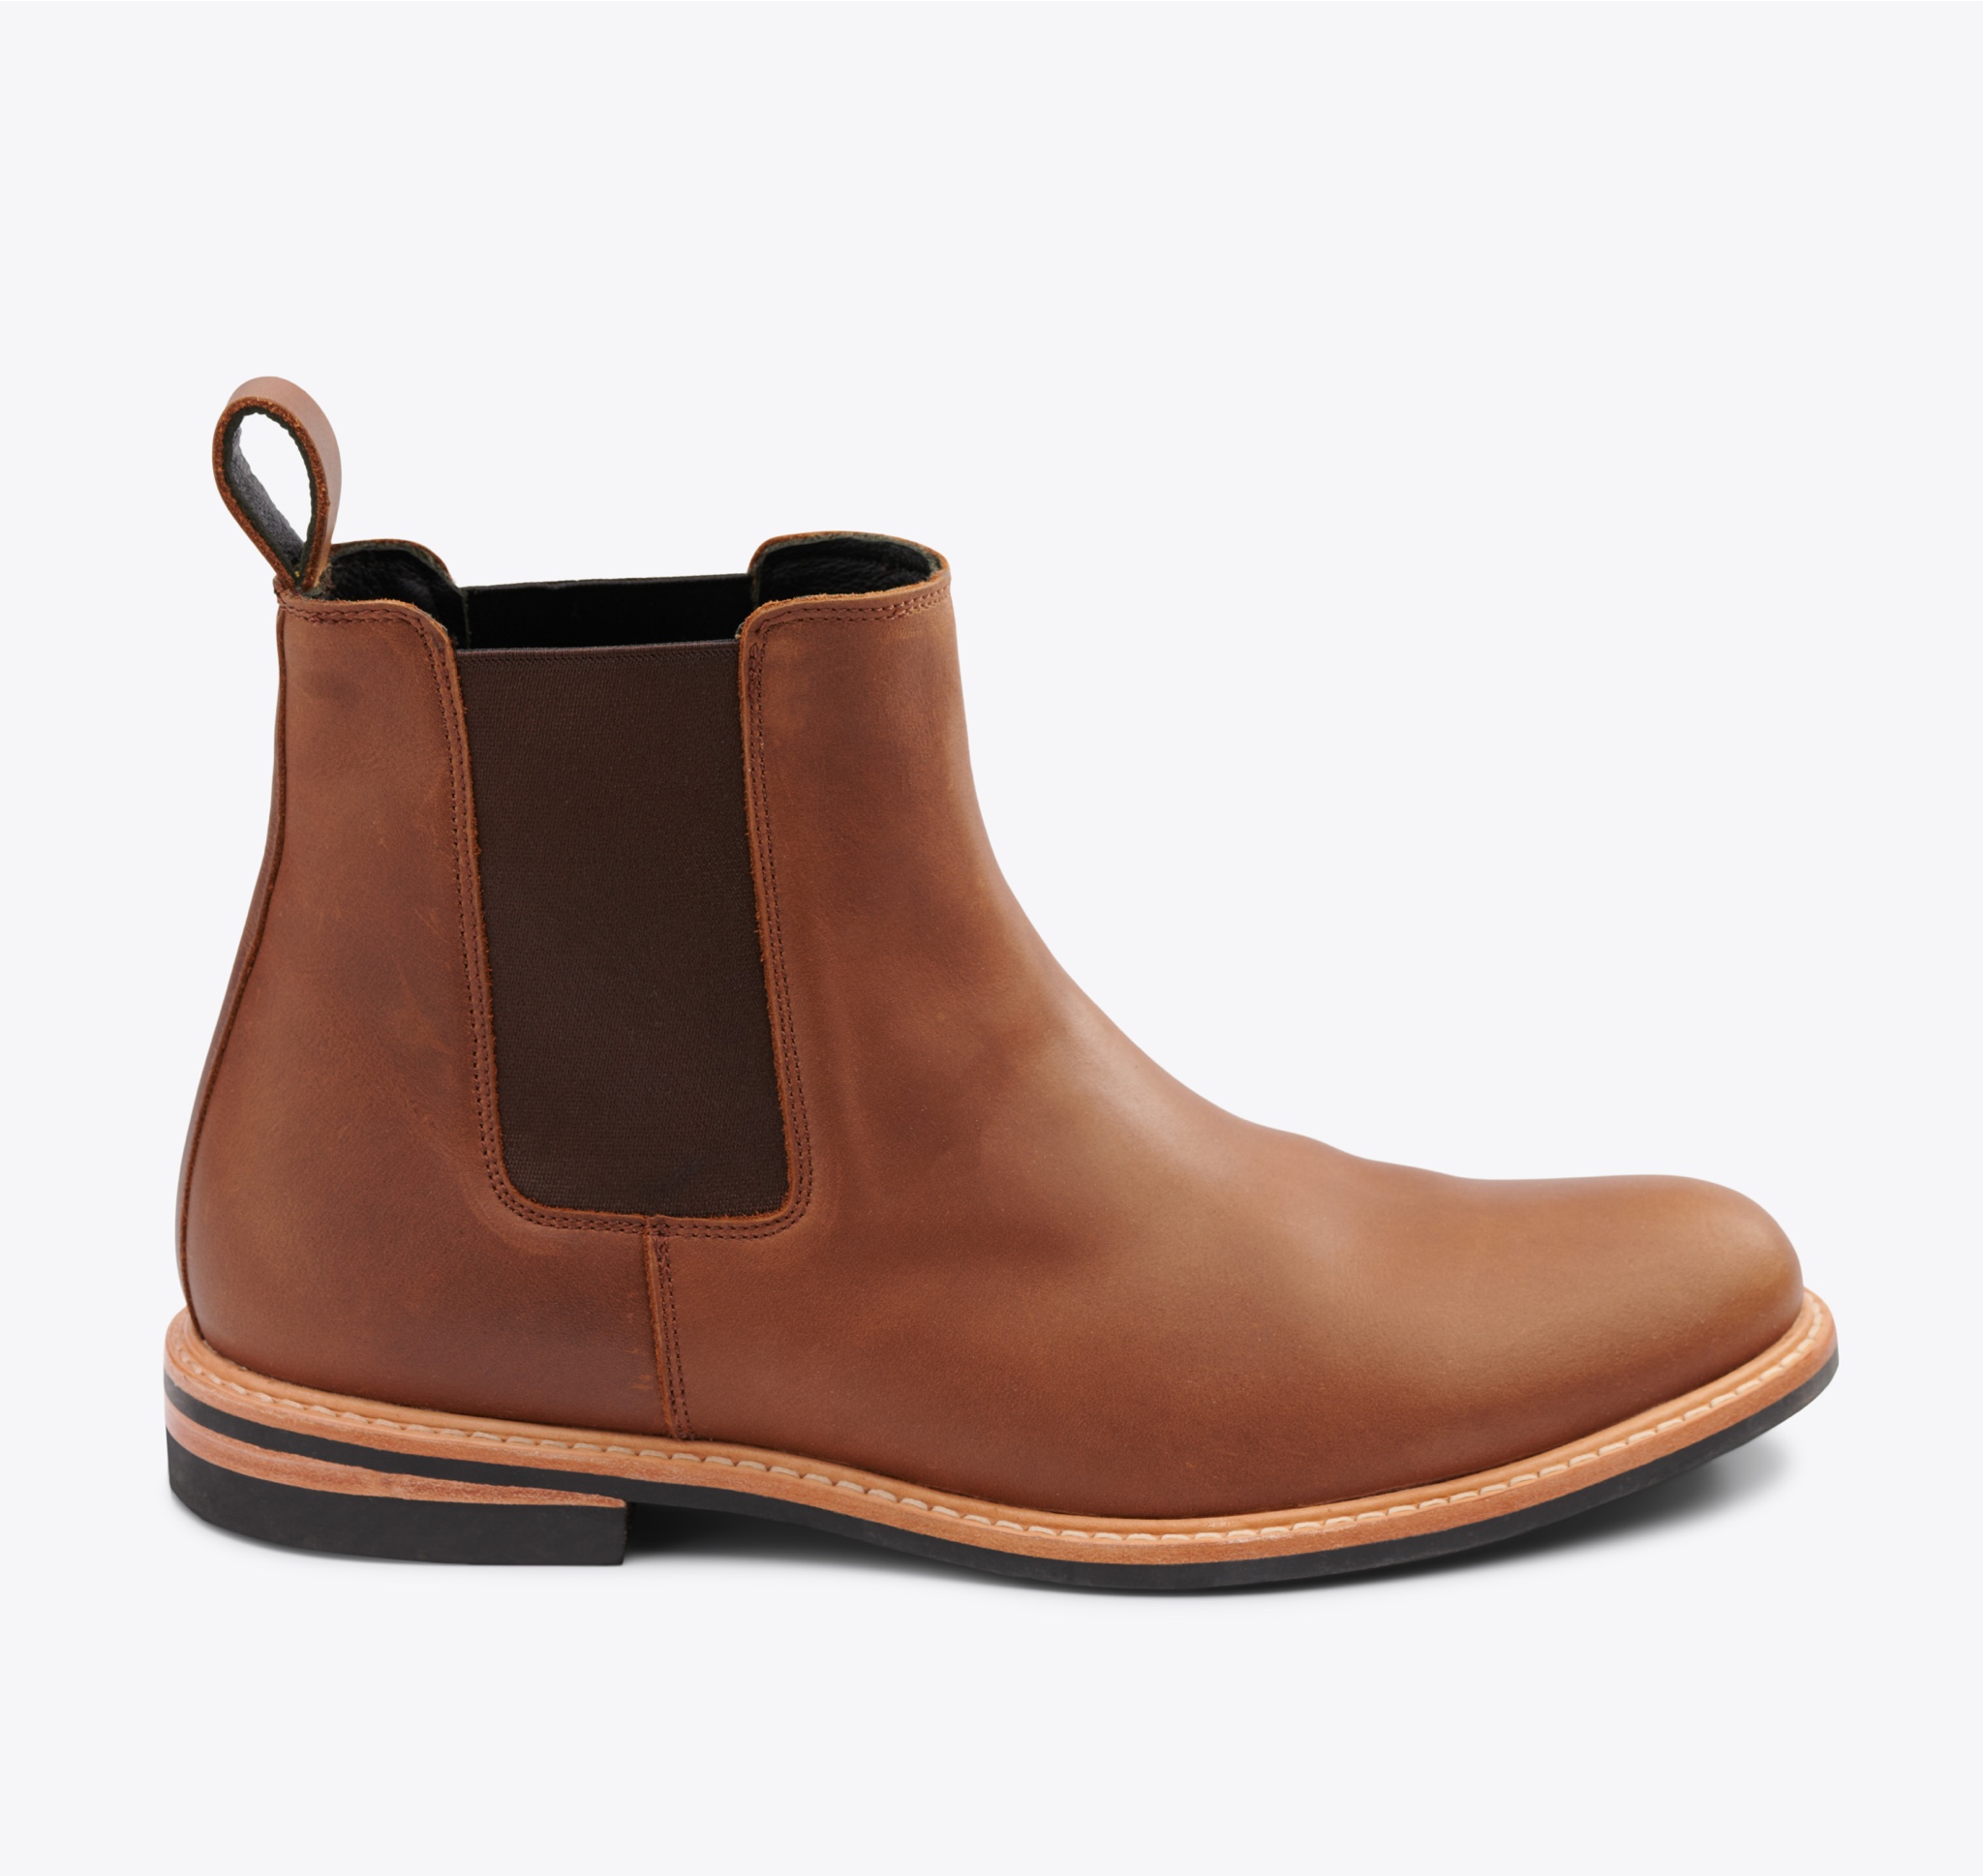 Nisolo All-Weather Chelsea Boot Brown - Every Nisolo product is built on the foundation of comfort, function, and design. 